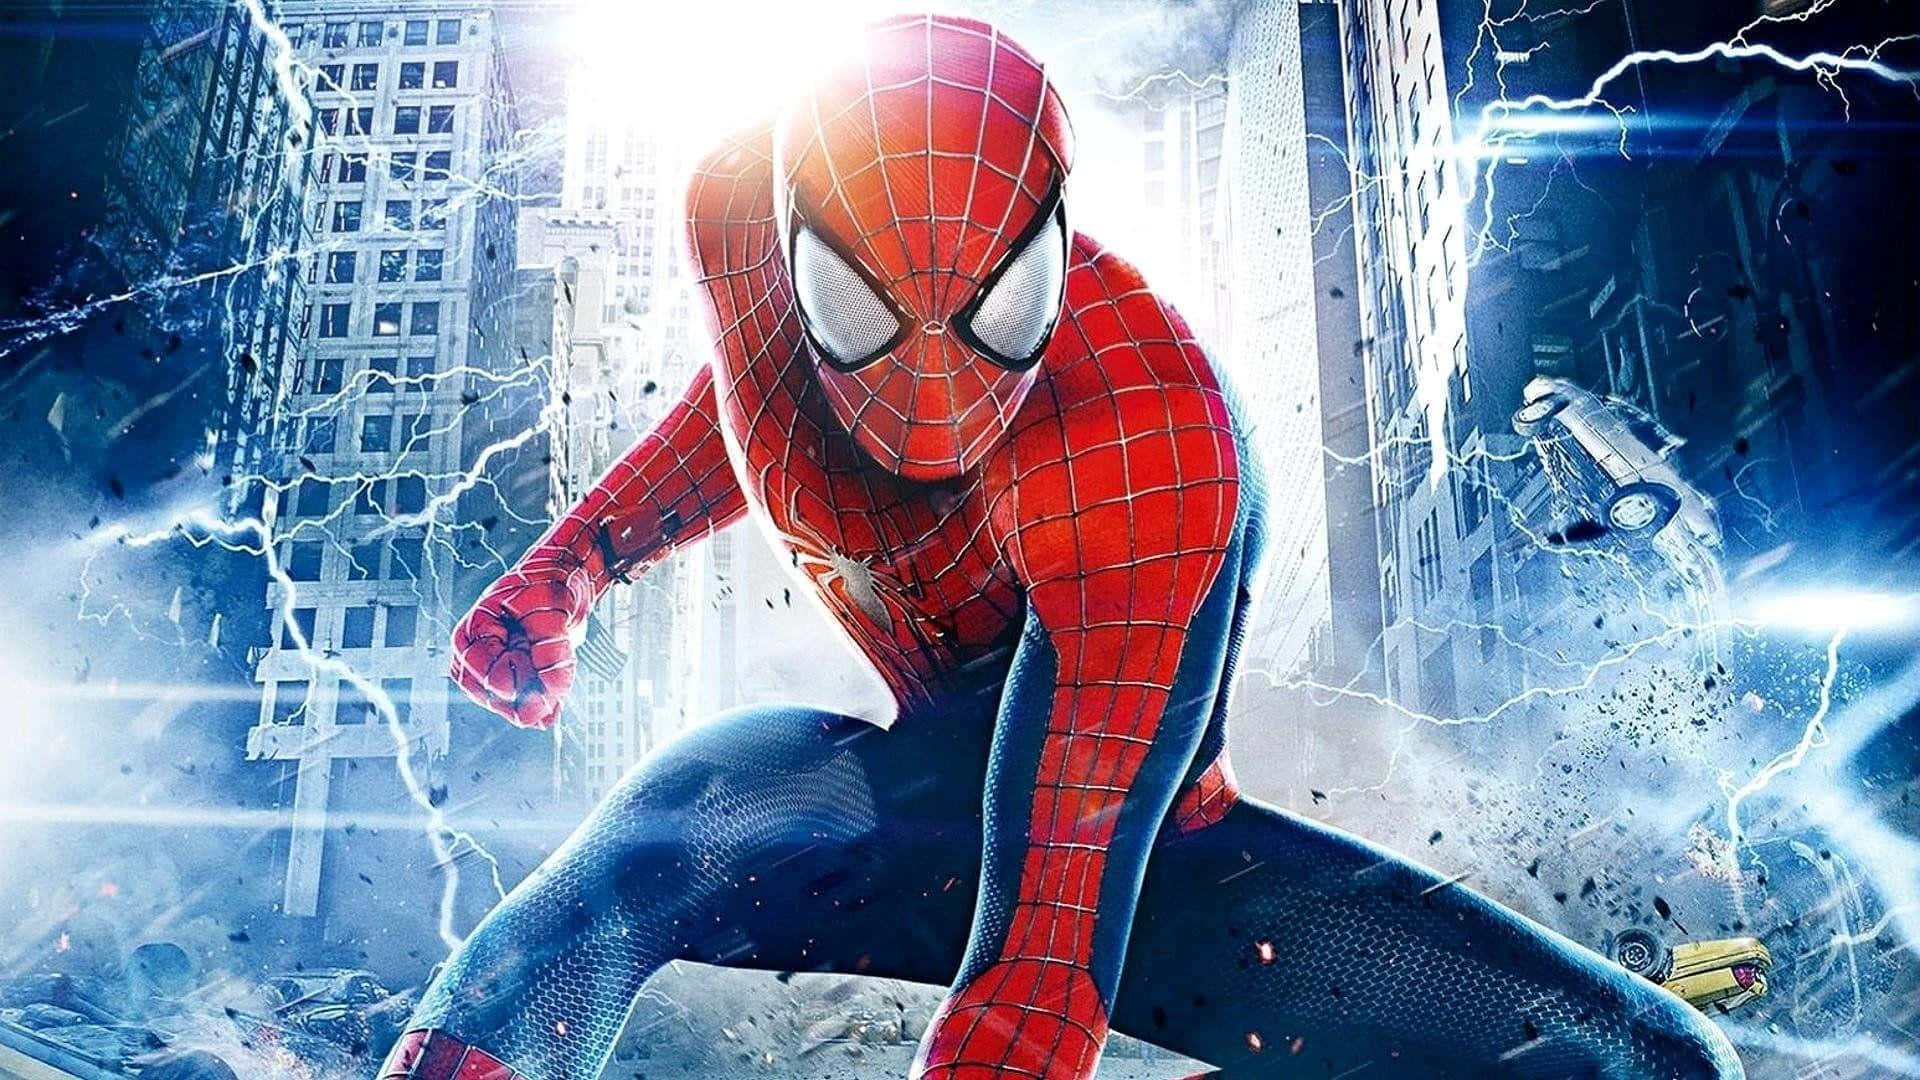 40+ Spider-Man 2 HD Wallpapers and Backgrounds